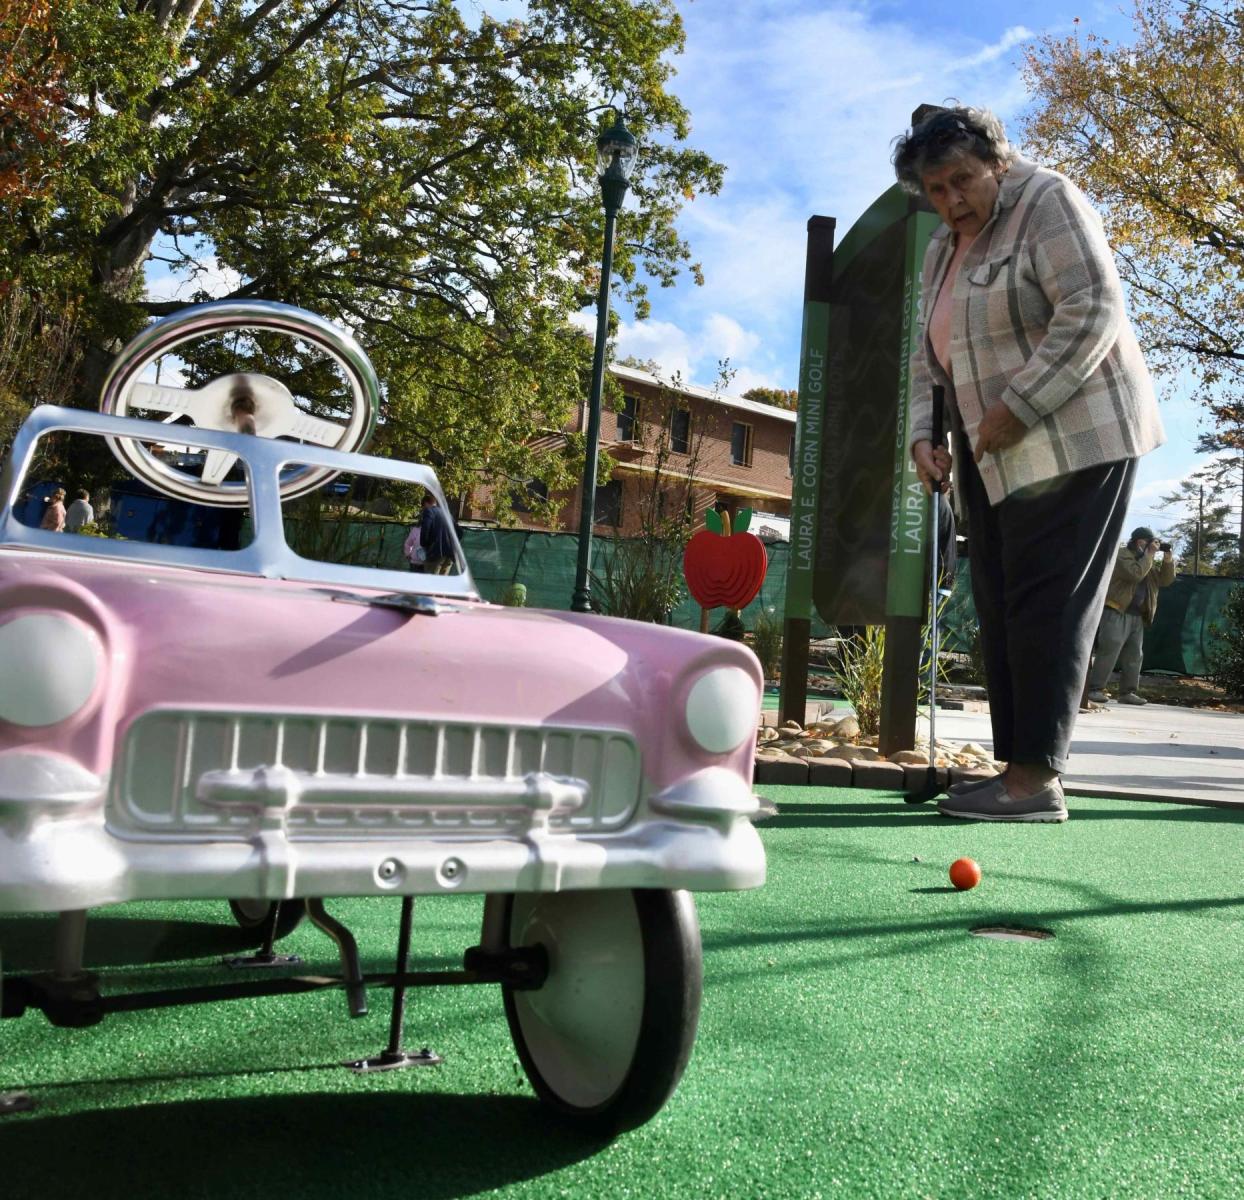 A woman playing mini golf beside a pink vintage car course feature